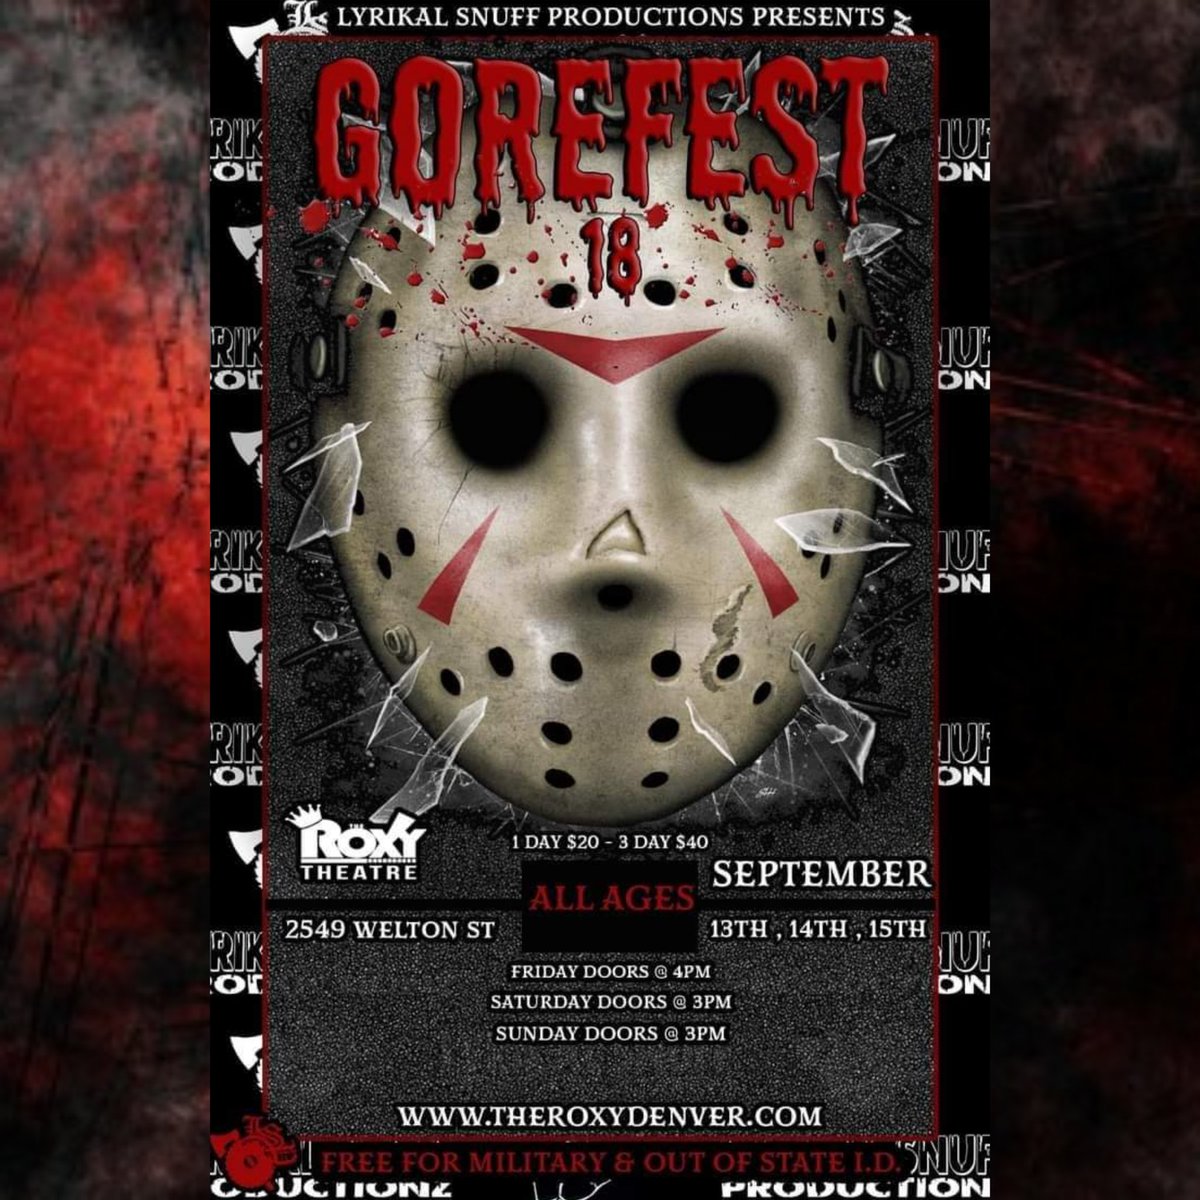 #GOREFEST18... IS COMING!!! September 13th-15th, Denver, CO at @TheRoxyDenver. GET YOUR TICKETS NOW!!! 🩸😈👆🏾🩸 #LSP